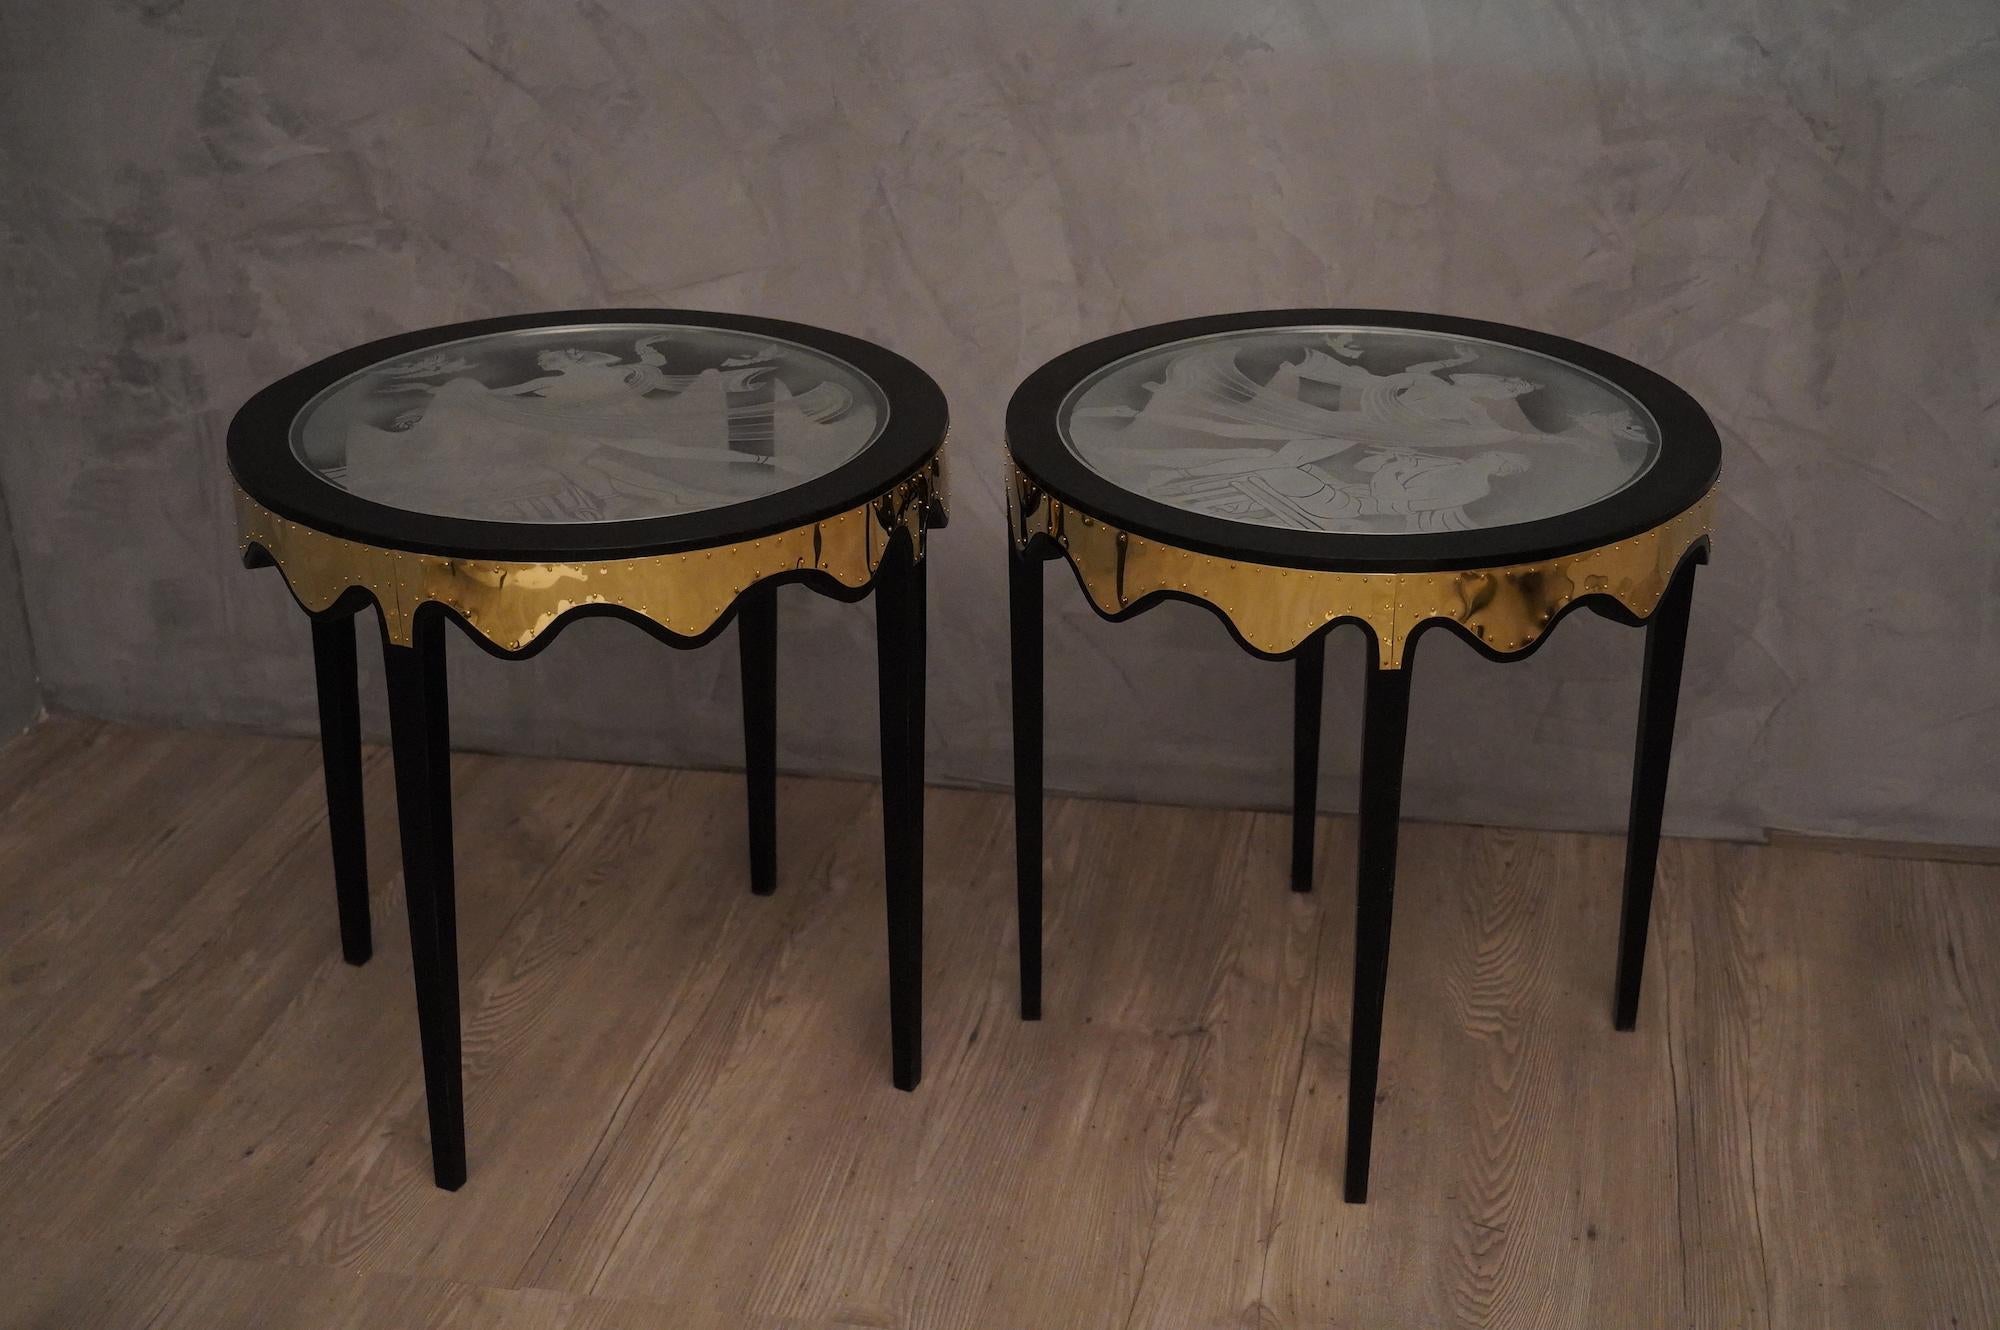 Wonderful of side tables in the Italian style of Fontana Arte; valuable choice of materials, a unique design. Glass with sandblasted design in the style of Gio Ponti.

Lovely round side tables all in beech wood polished with black shellac. The top